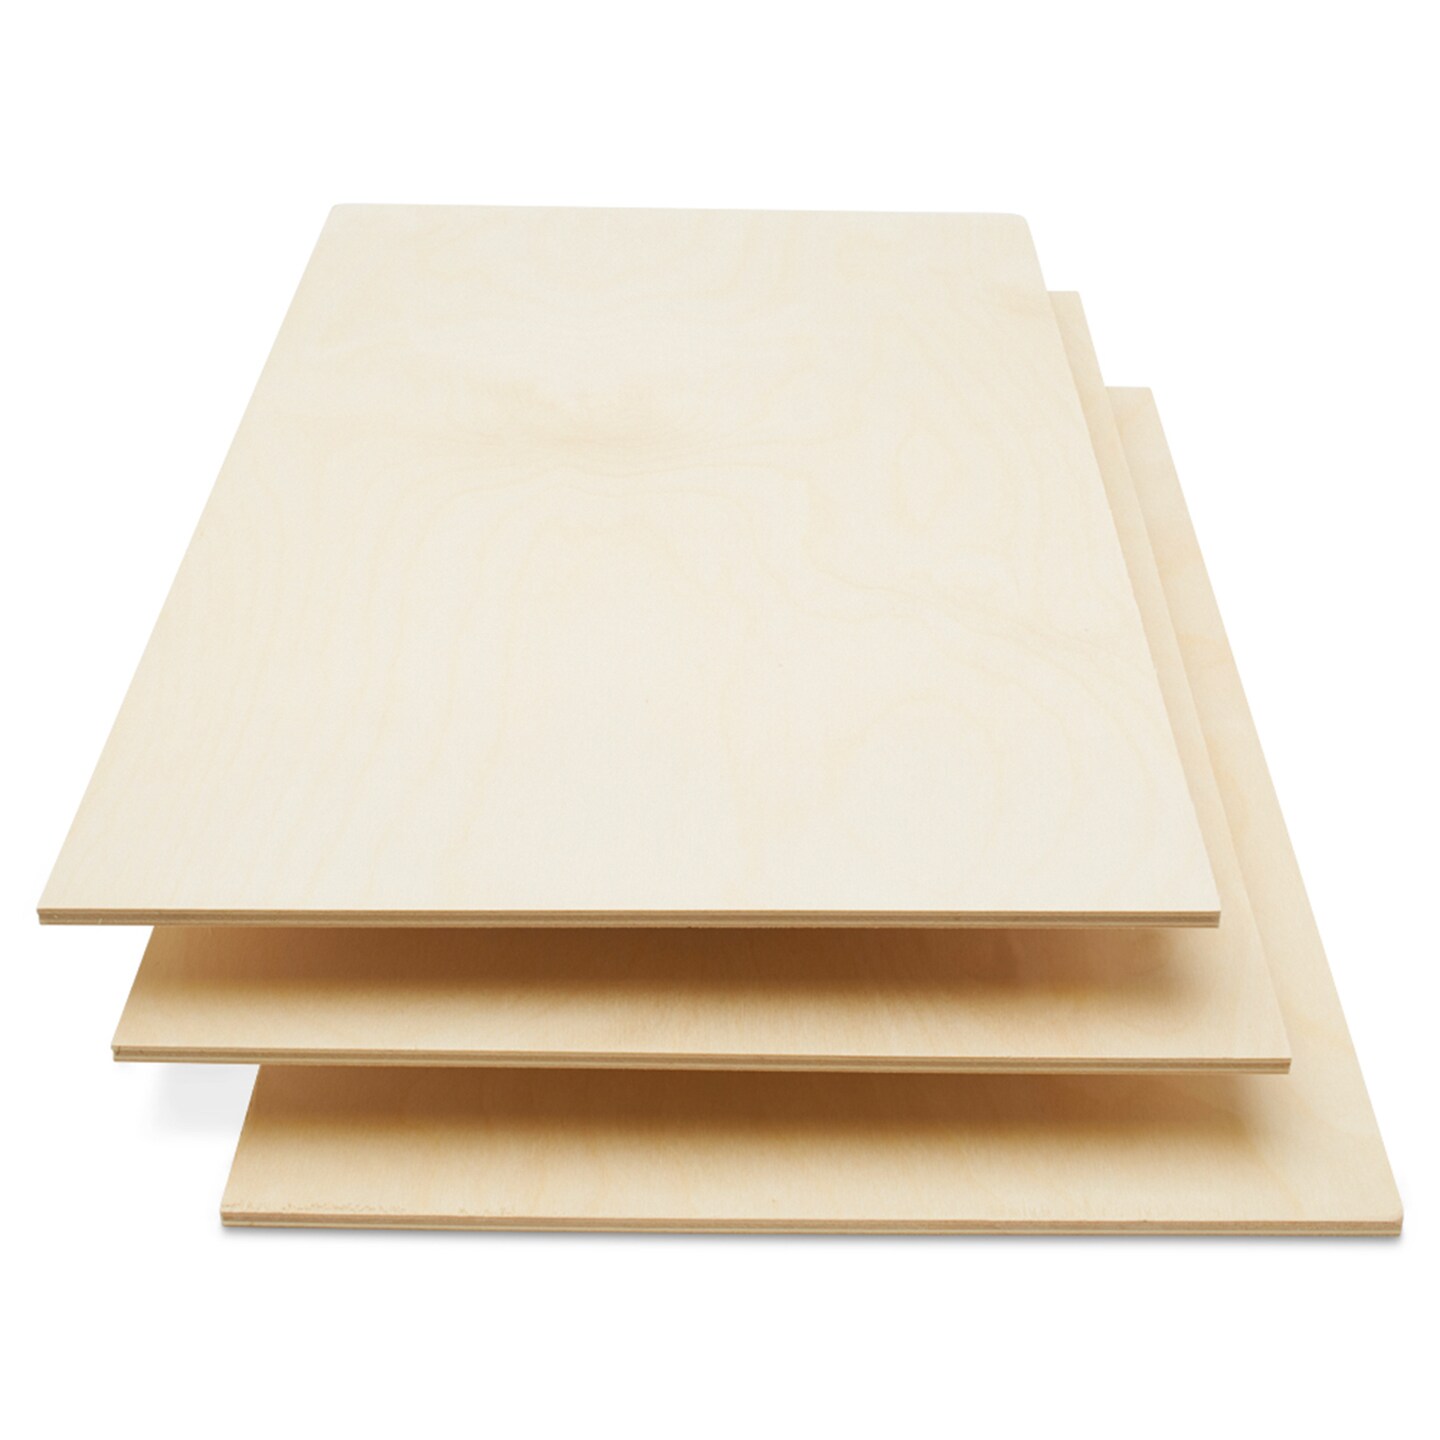 Baltic Birch Plywood, 12 x 20 Inch, B/BB Grade Sheets, 1/4 or 1/8 Inch Thick| Woodpeckers